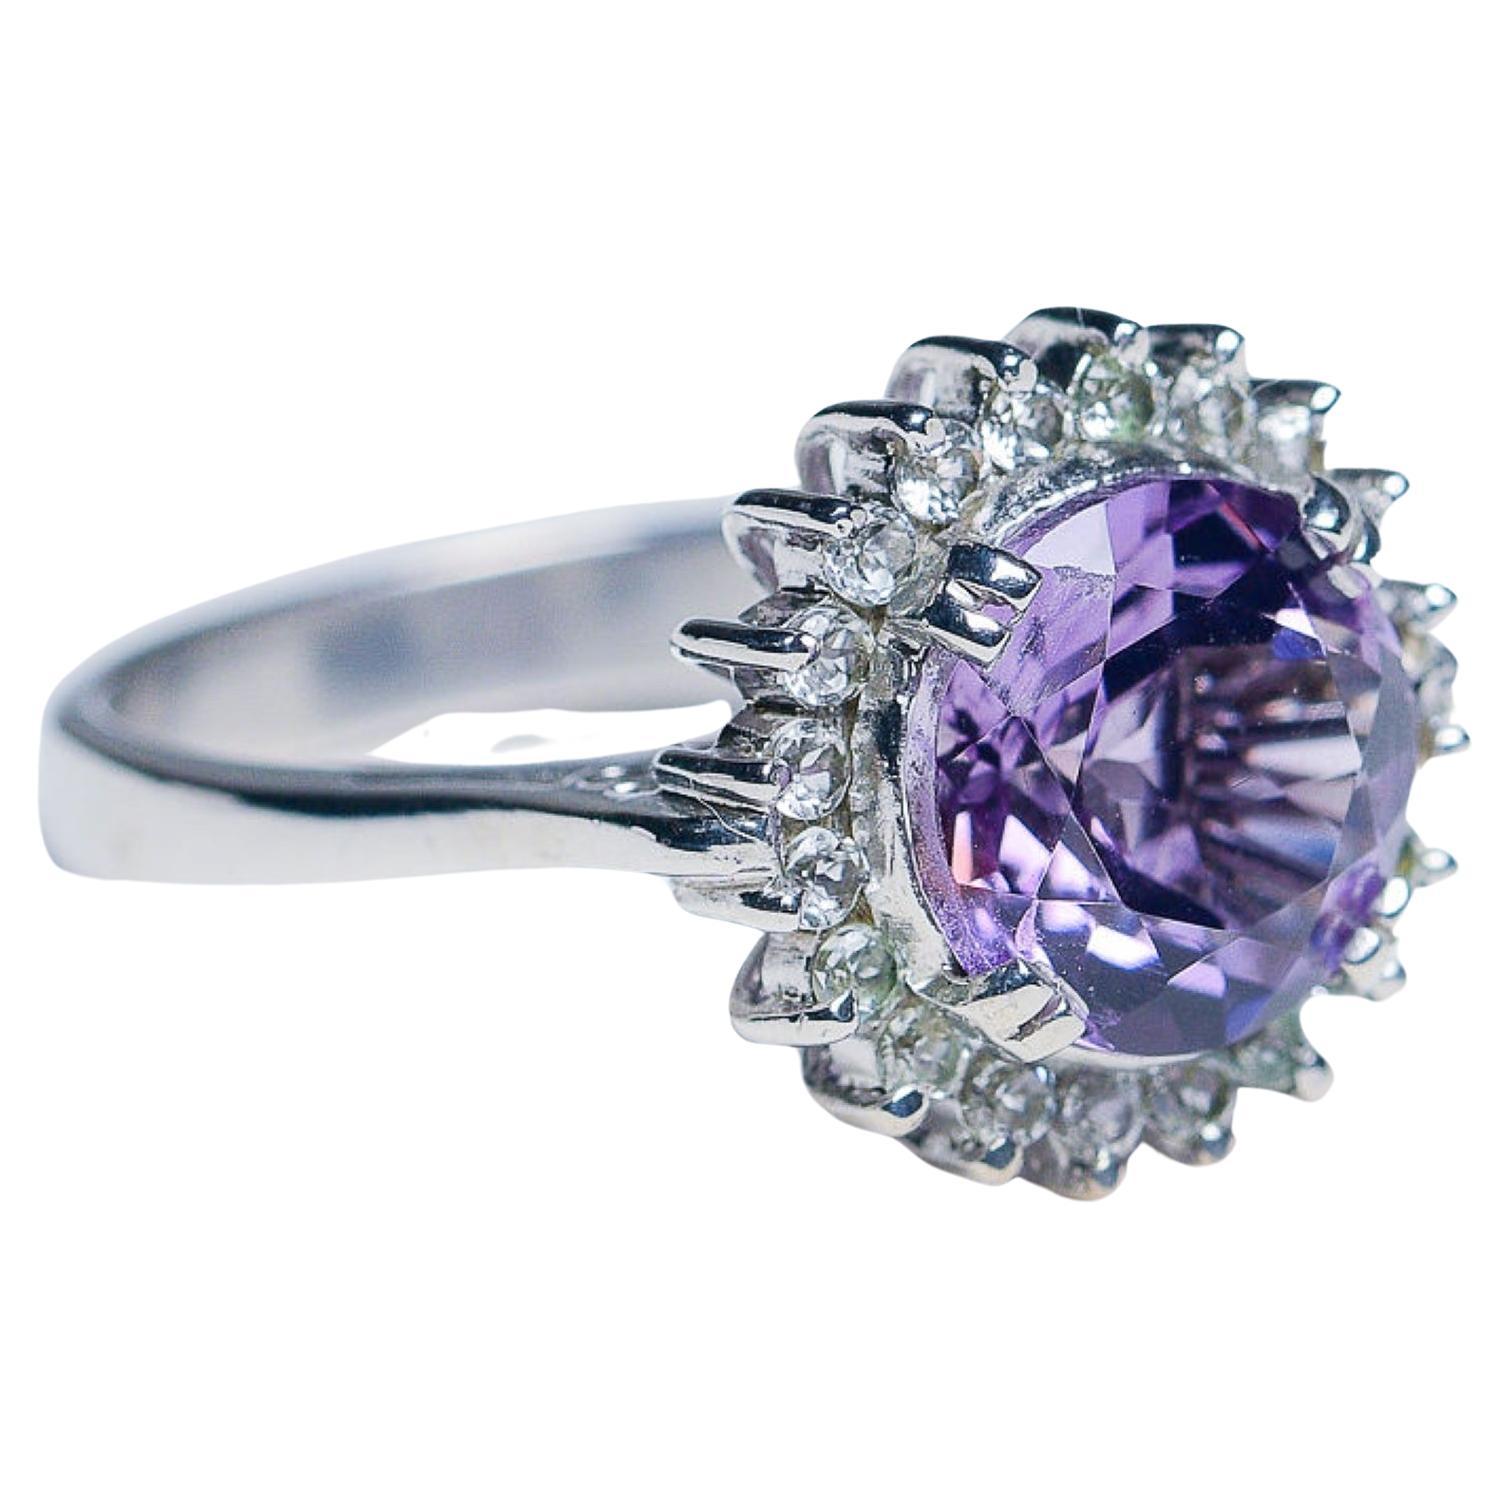 Elevate your style with our exquisite 2.50ct Round Cut Purple Amethyst Statement Ring, a true testament to elegance and sophistication. This captivating ring features a brilliant 2.50ct round cut natural purple amethyst gemstone encircled by 20